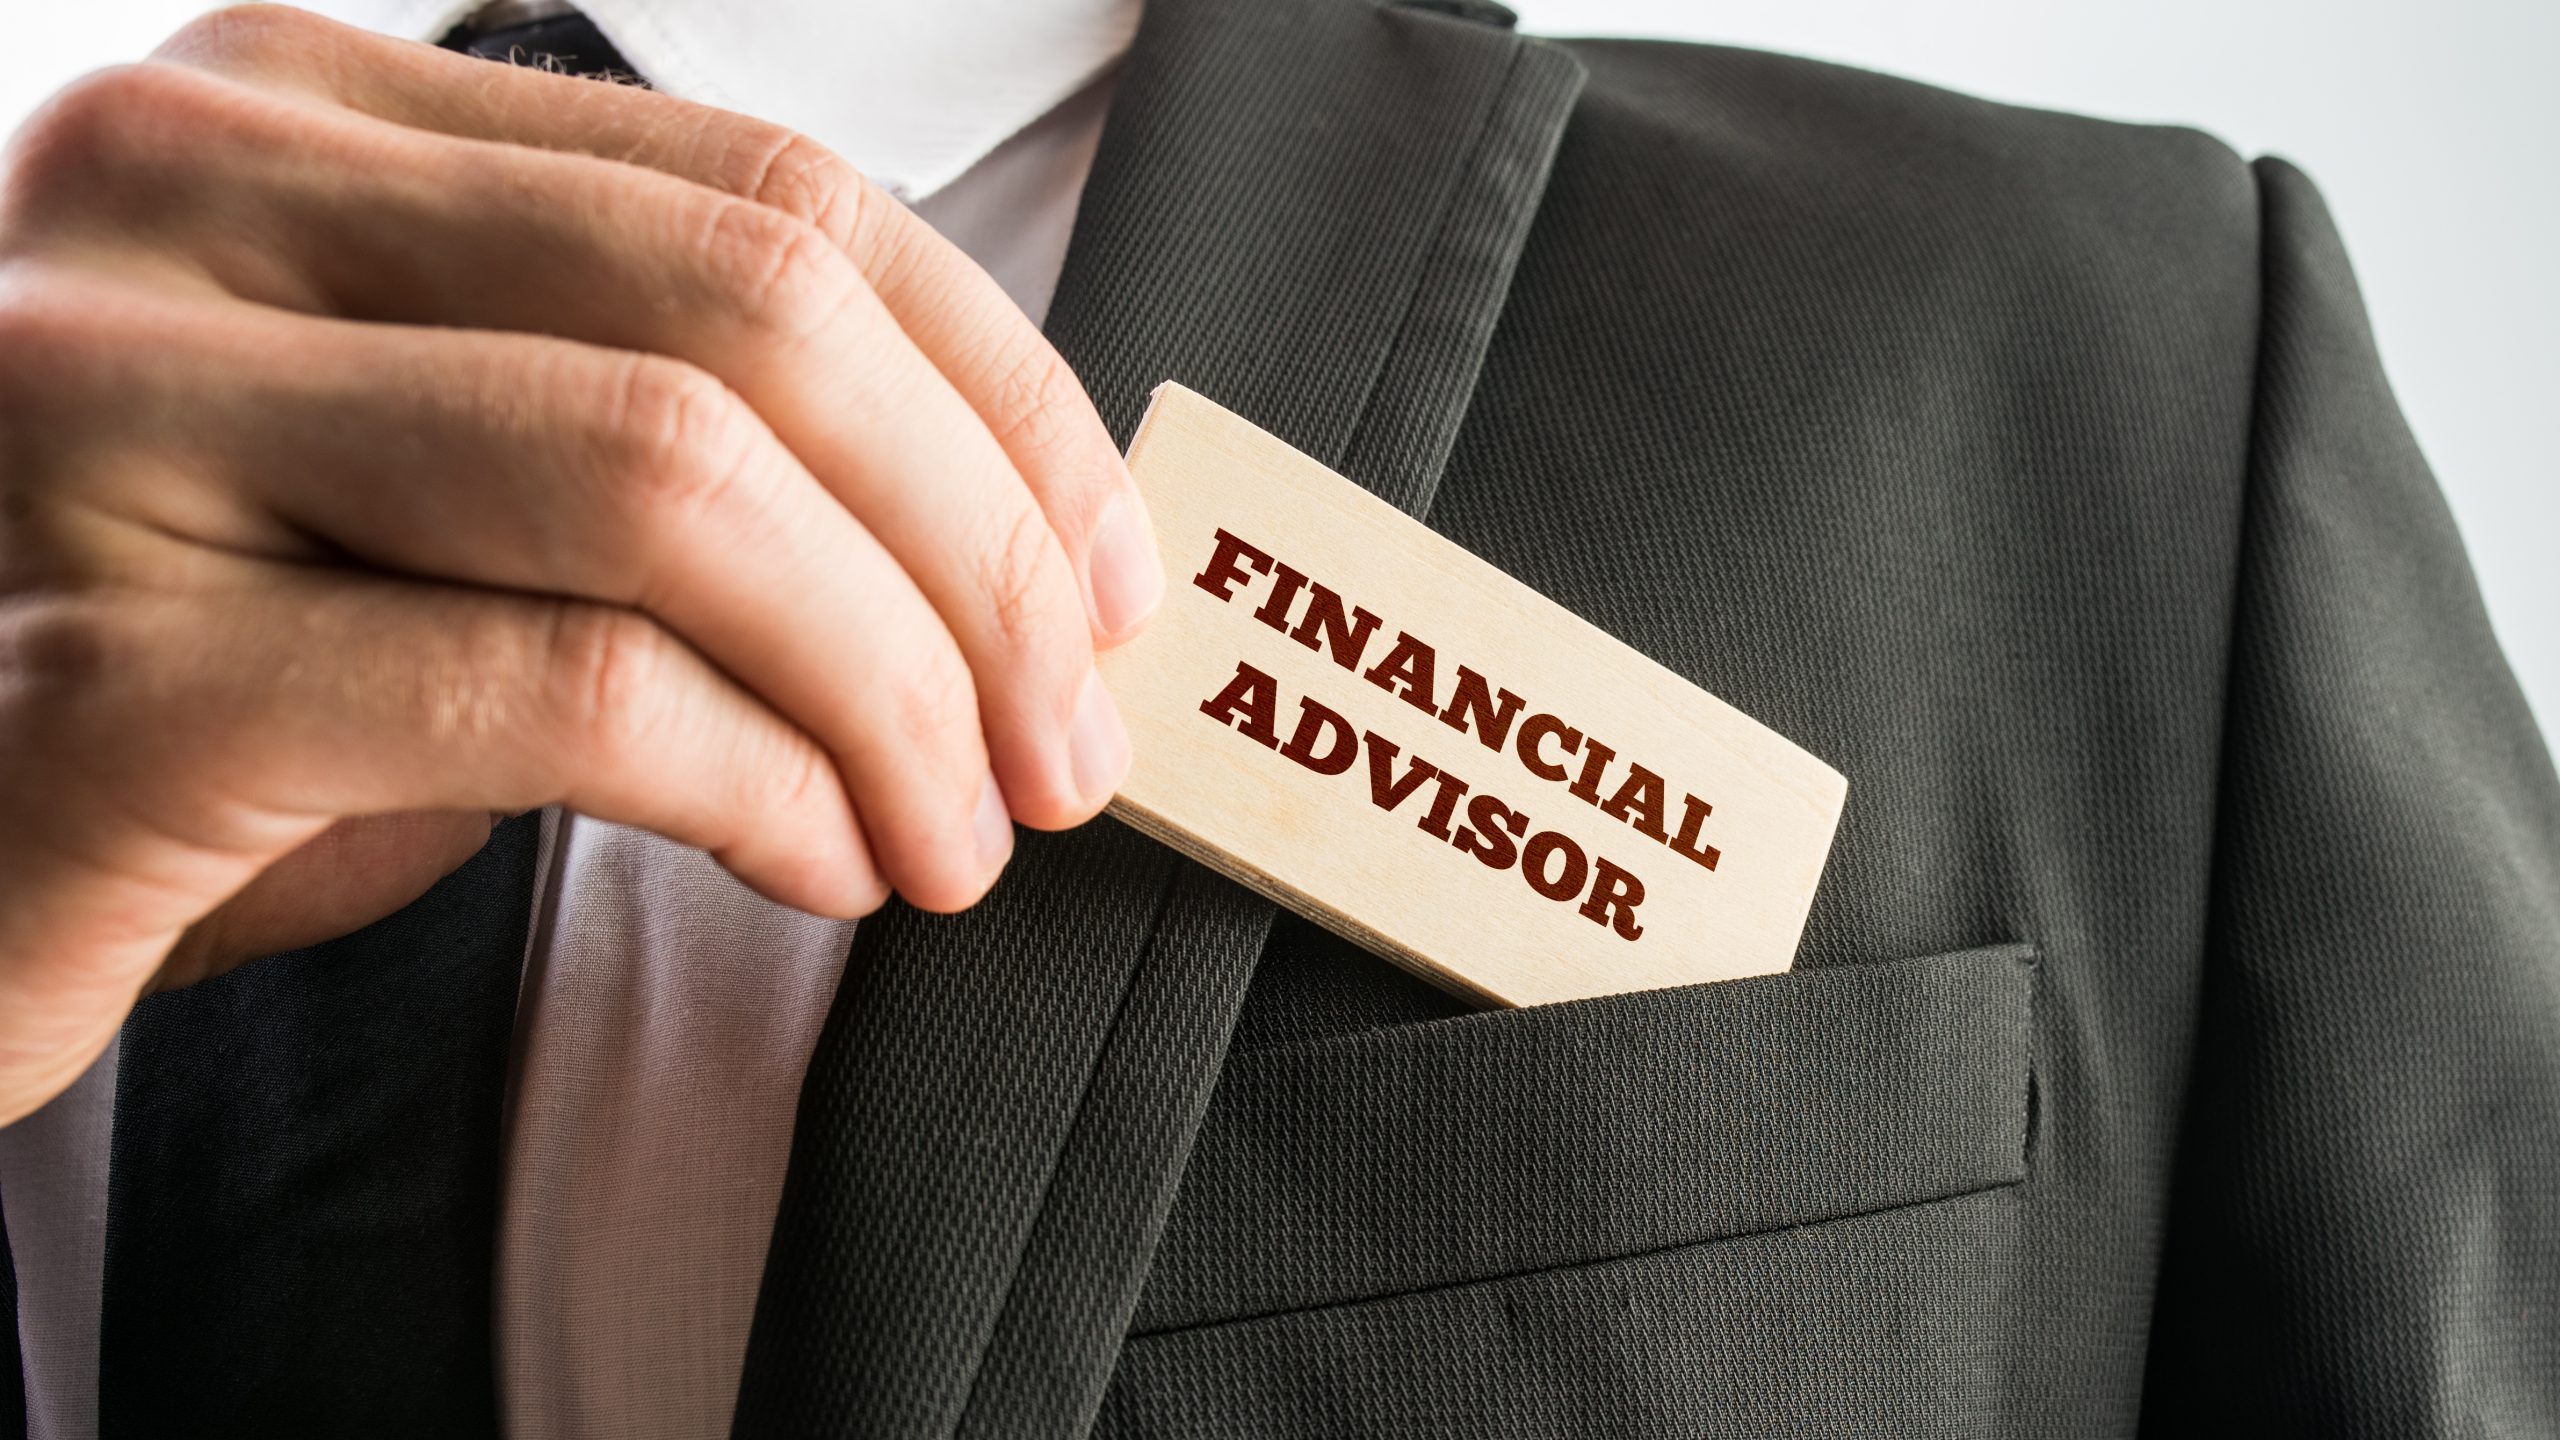 fiduciary investment advisors, right financial advisor, successful relationship